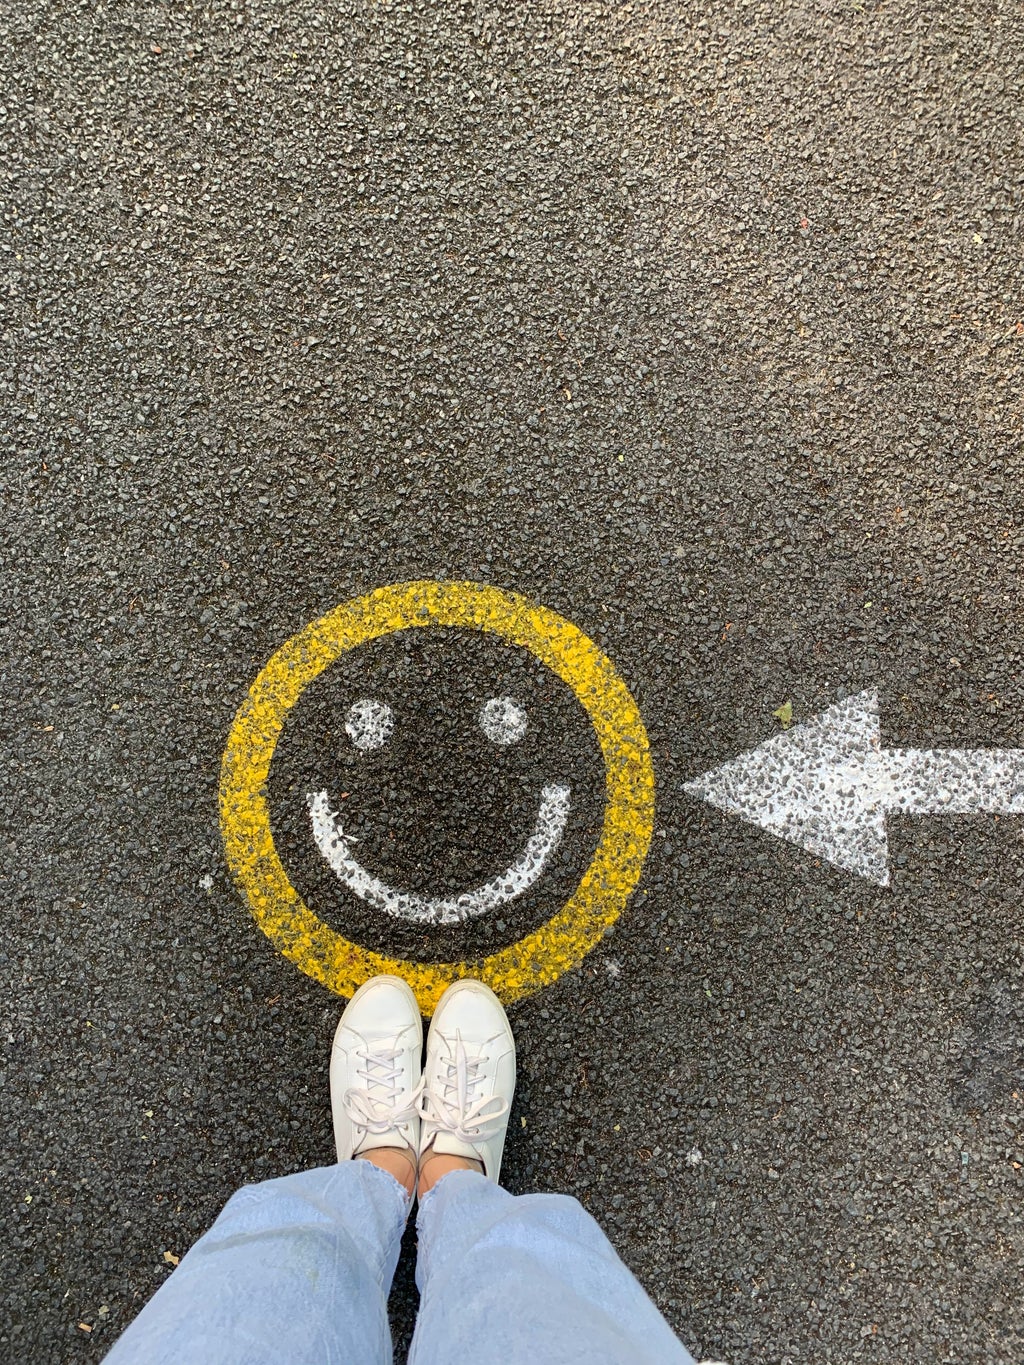 Smiley face on the street